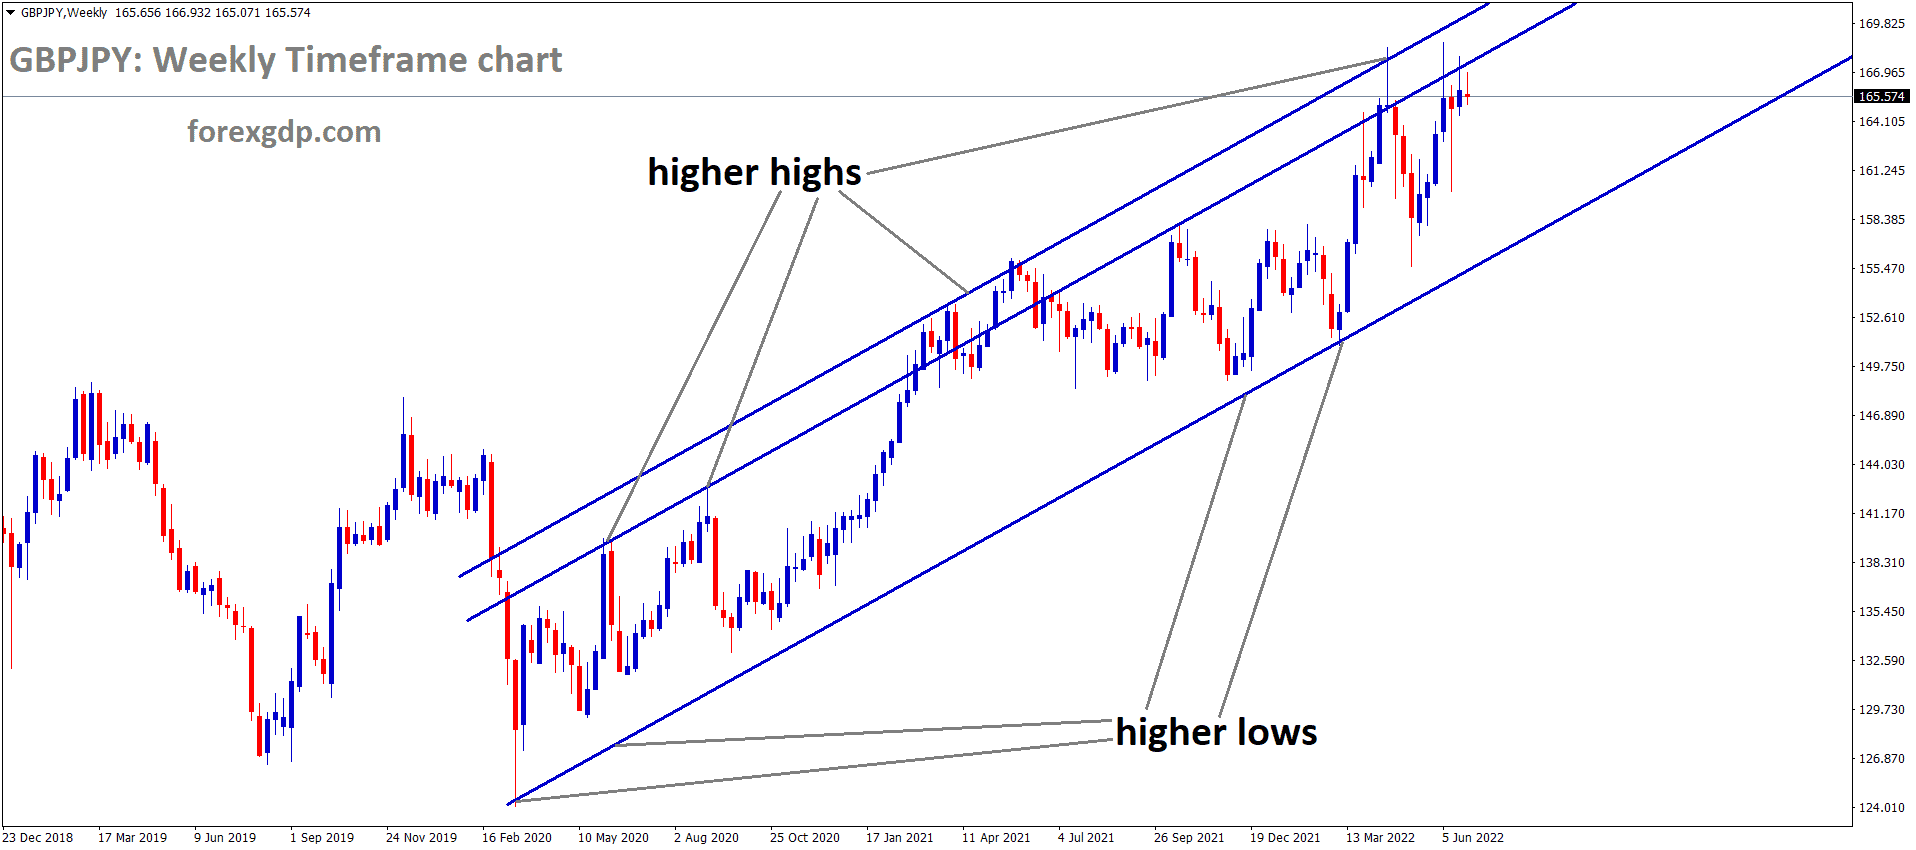 GBPJPY Weekly Time Frame Analysis Market is moving in an Ascending channel and the Market has reached the higher high area of the channel.